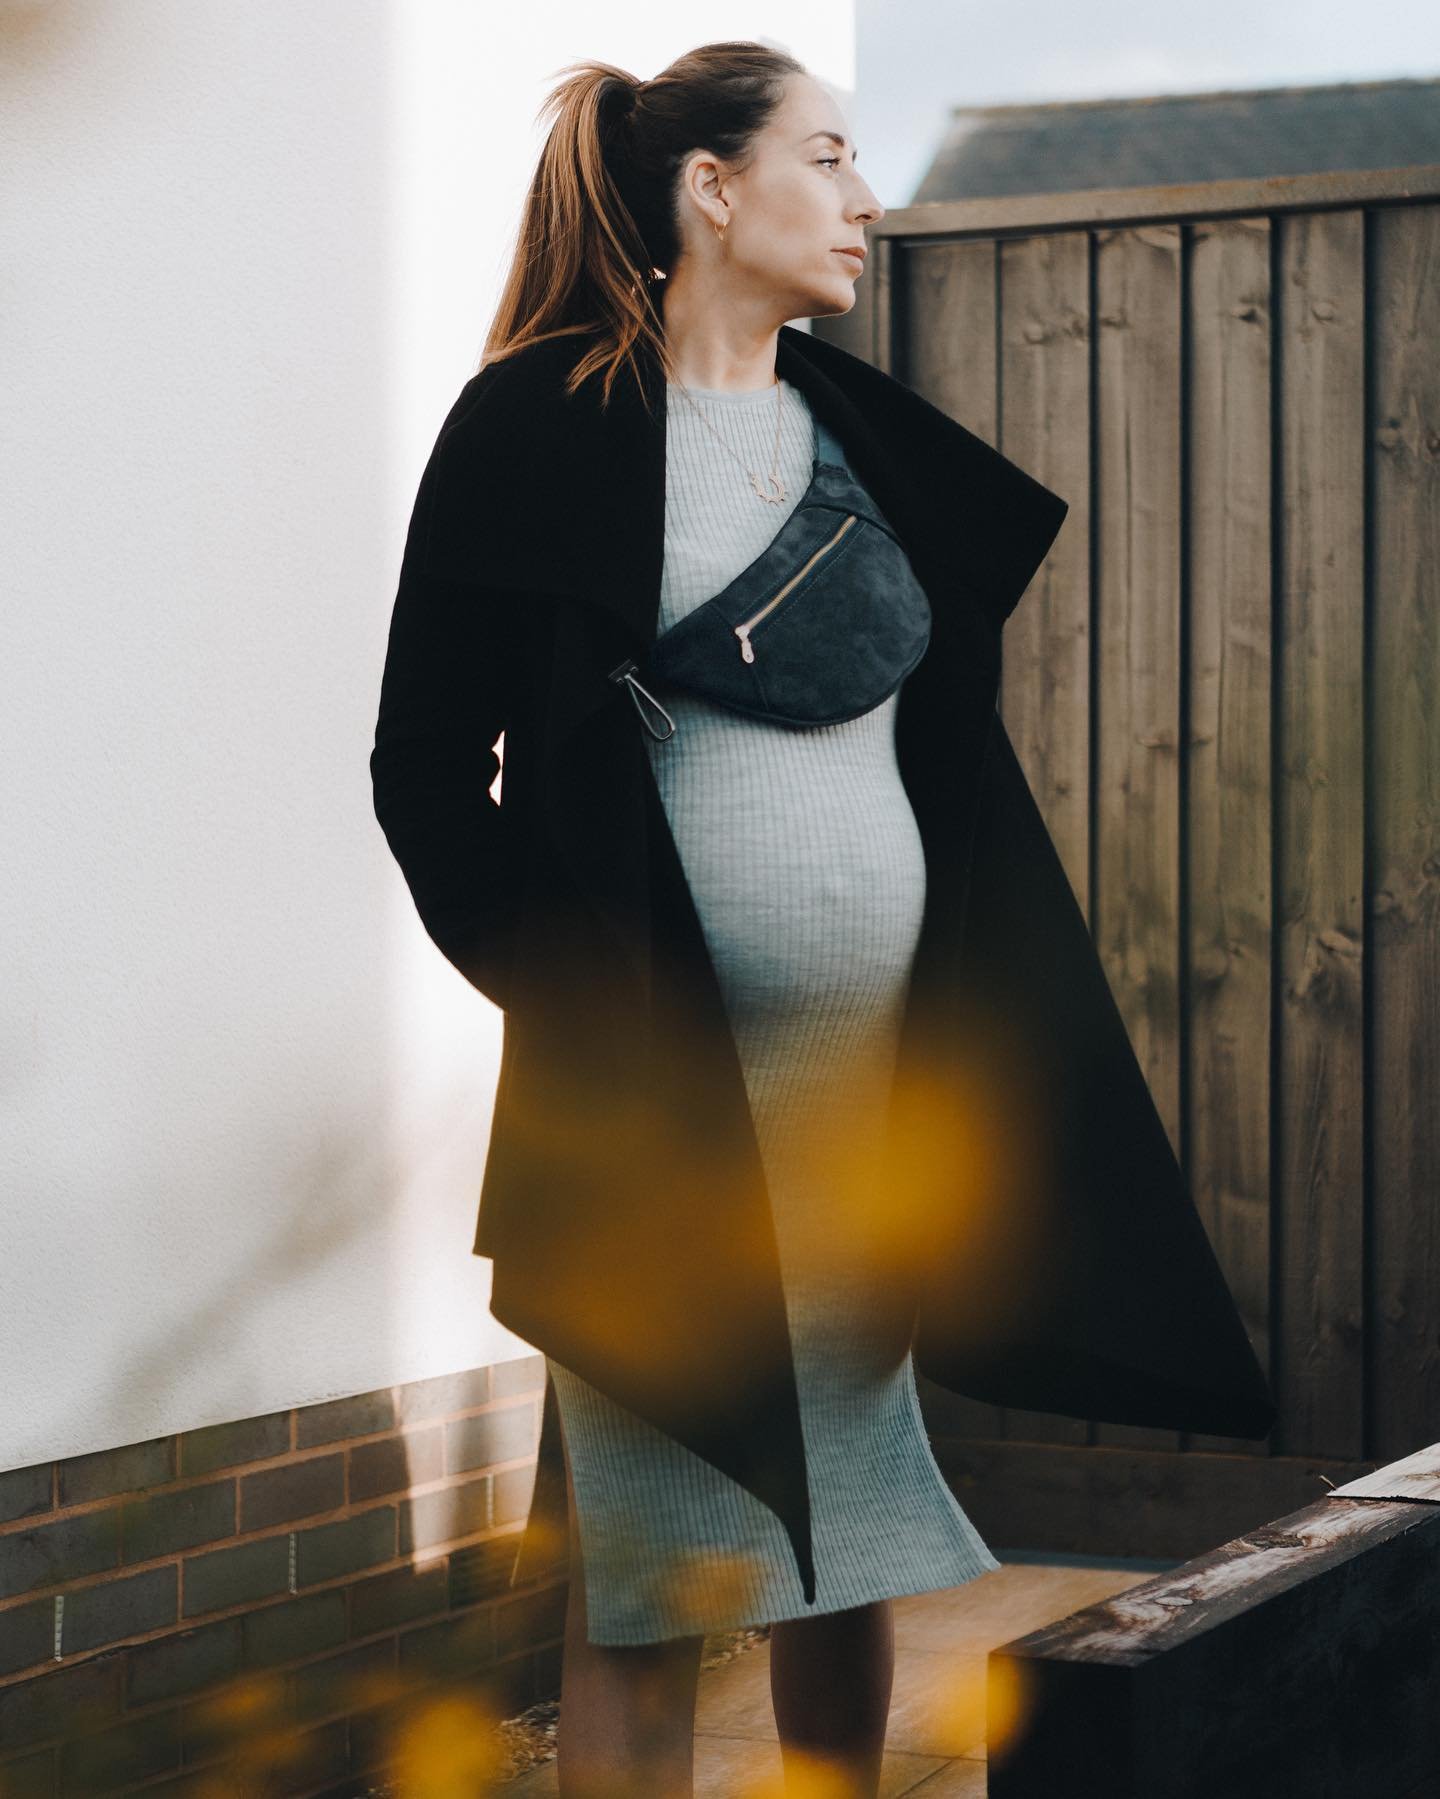 C A T  I S  O U T  O F  T H E  B A G

For the more eagle eyed of you, you may have already have guessed from yesterdays post, but I am currently pregnant and expecting my second baby in early June. 

So this limited run of sling bags, in collaboratio